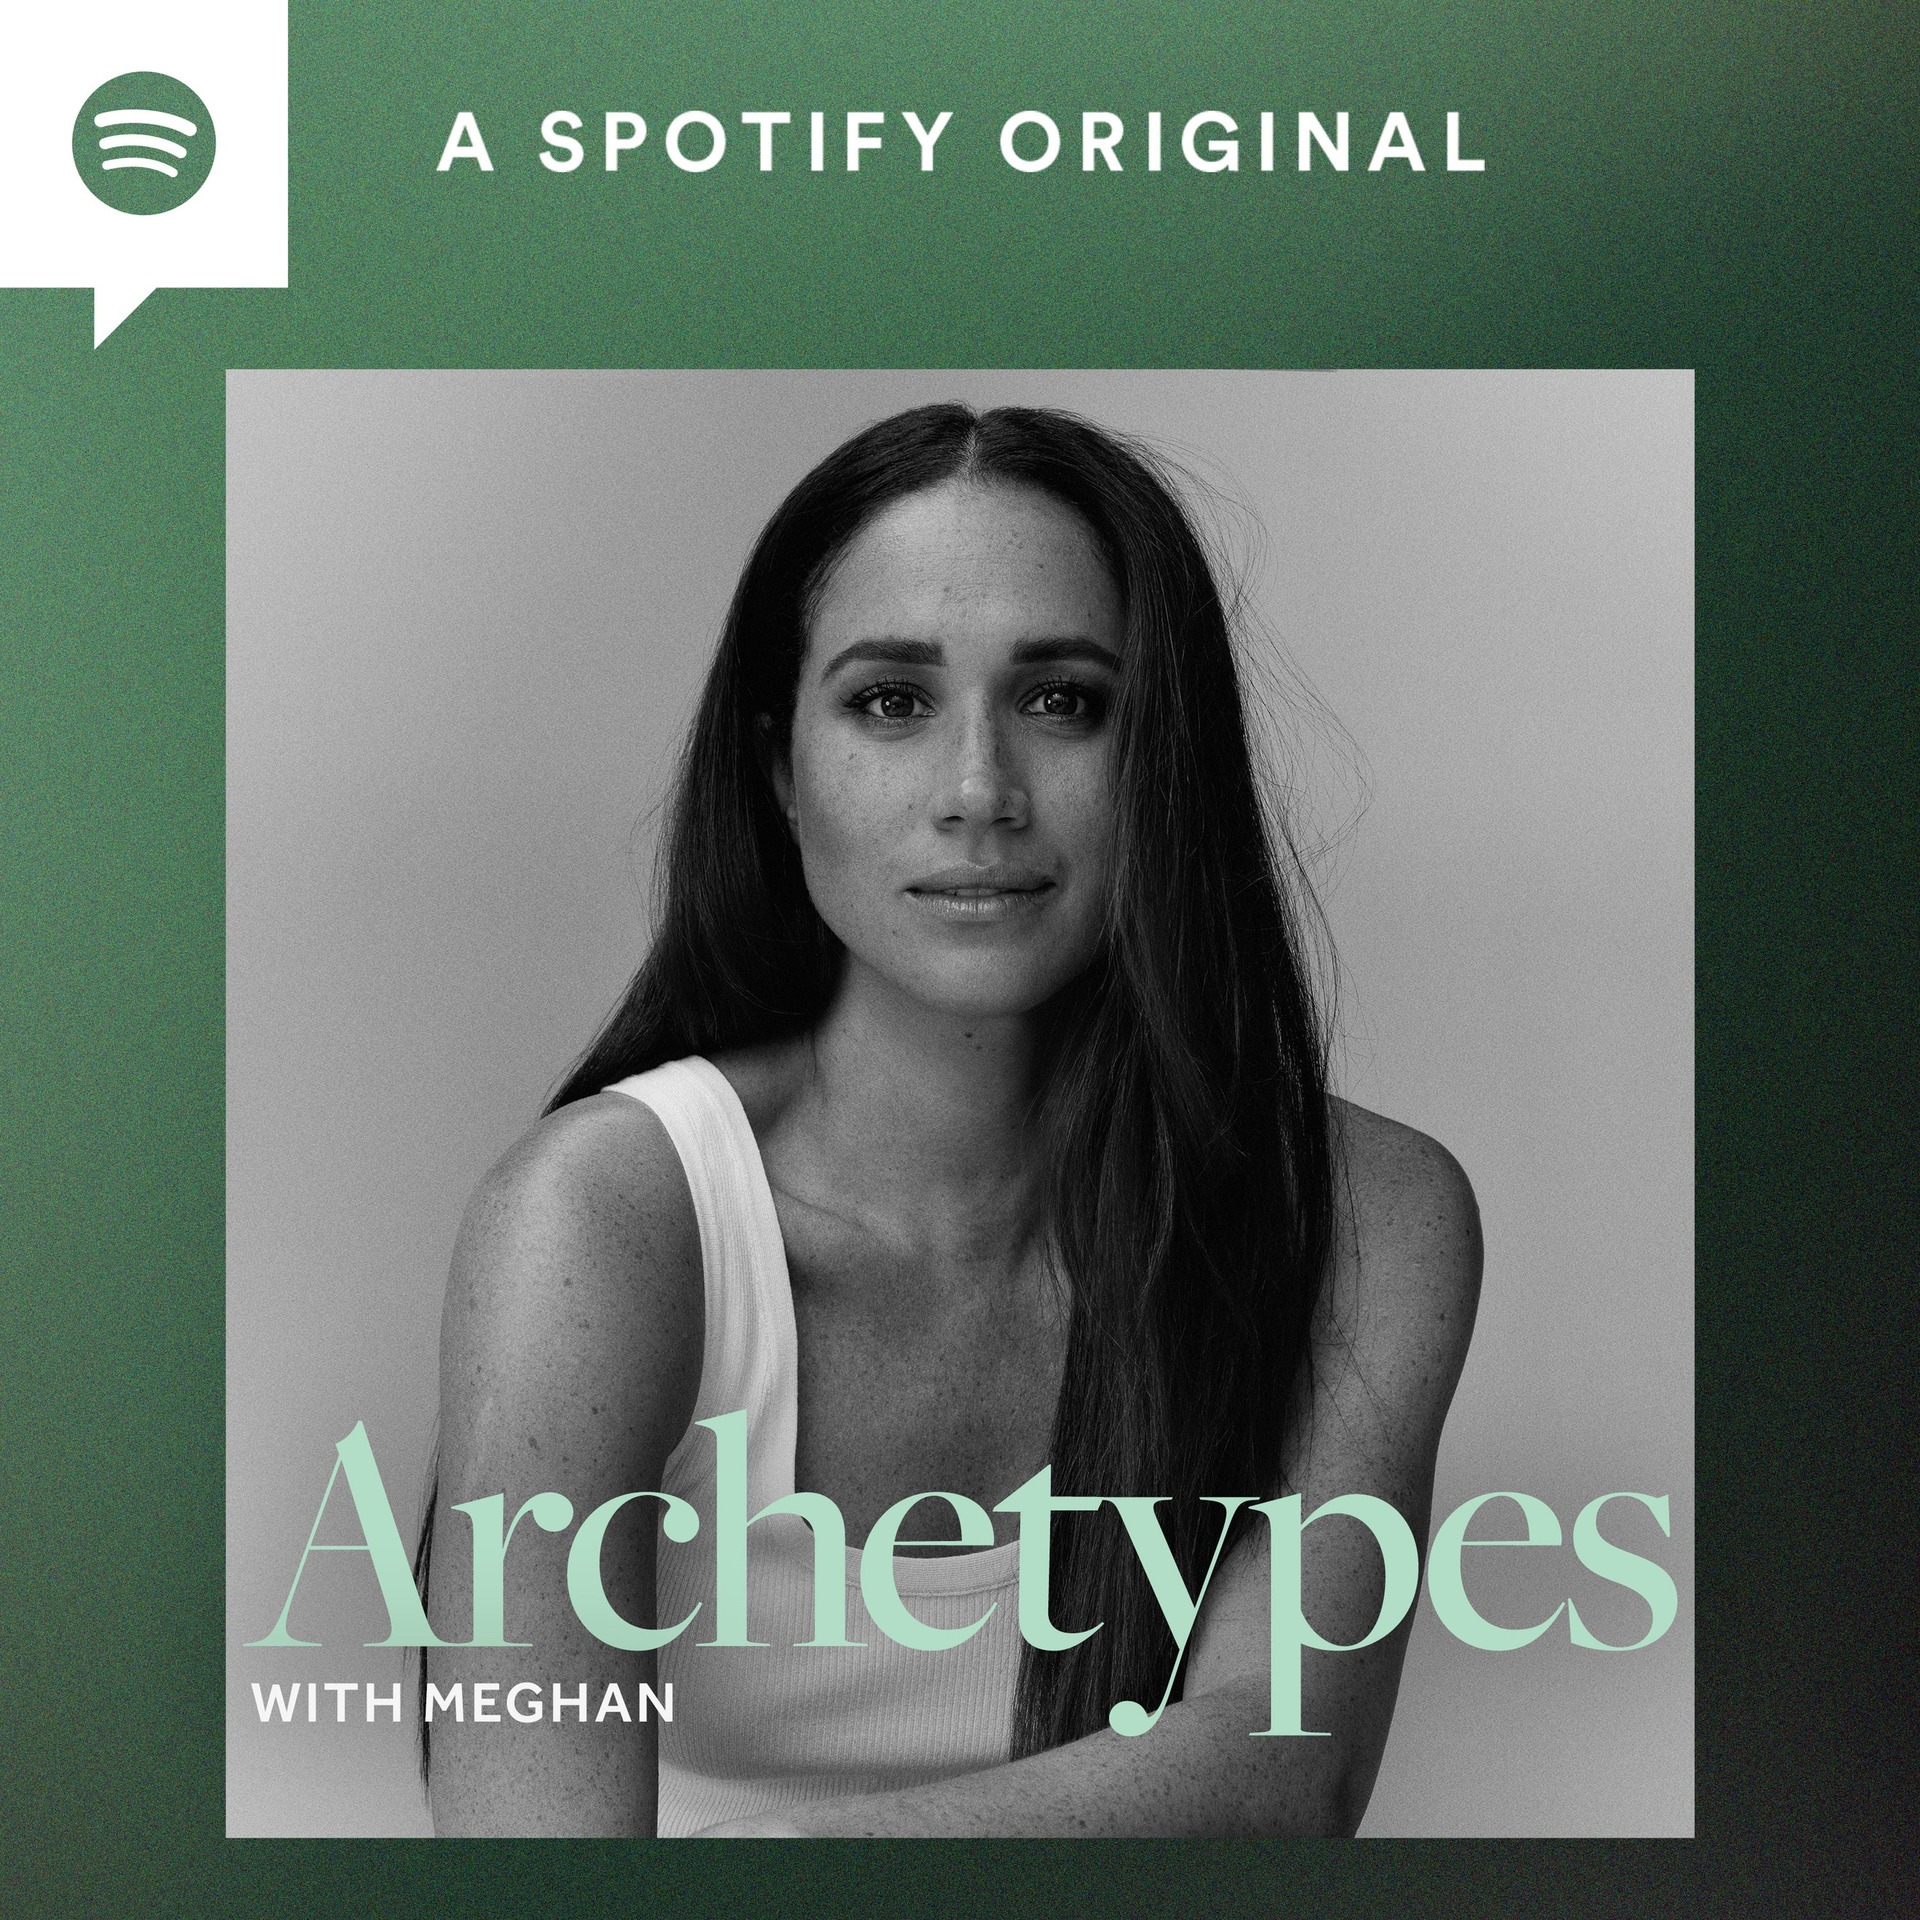 The podcast cover of Archetypes showing the Duchess of Sussex.